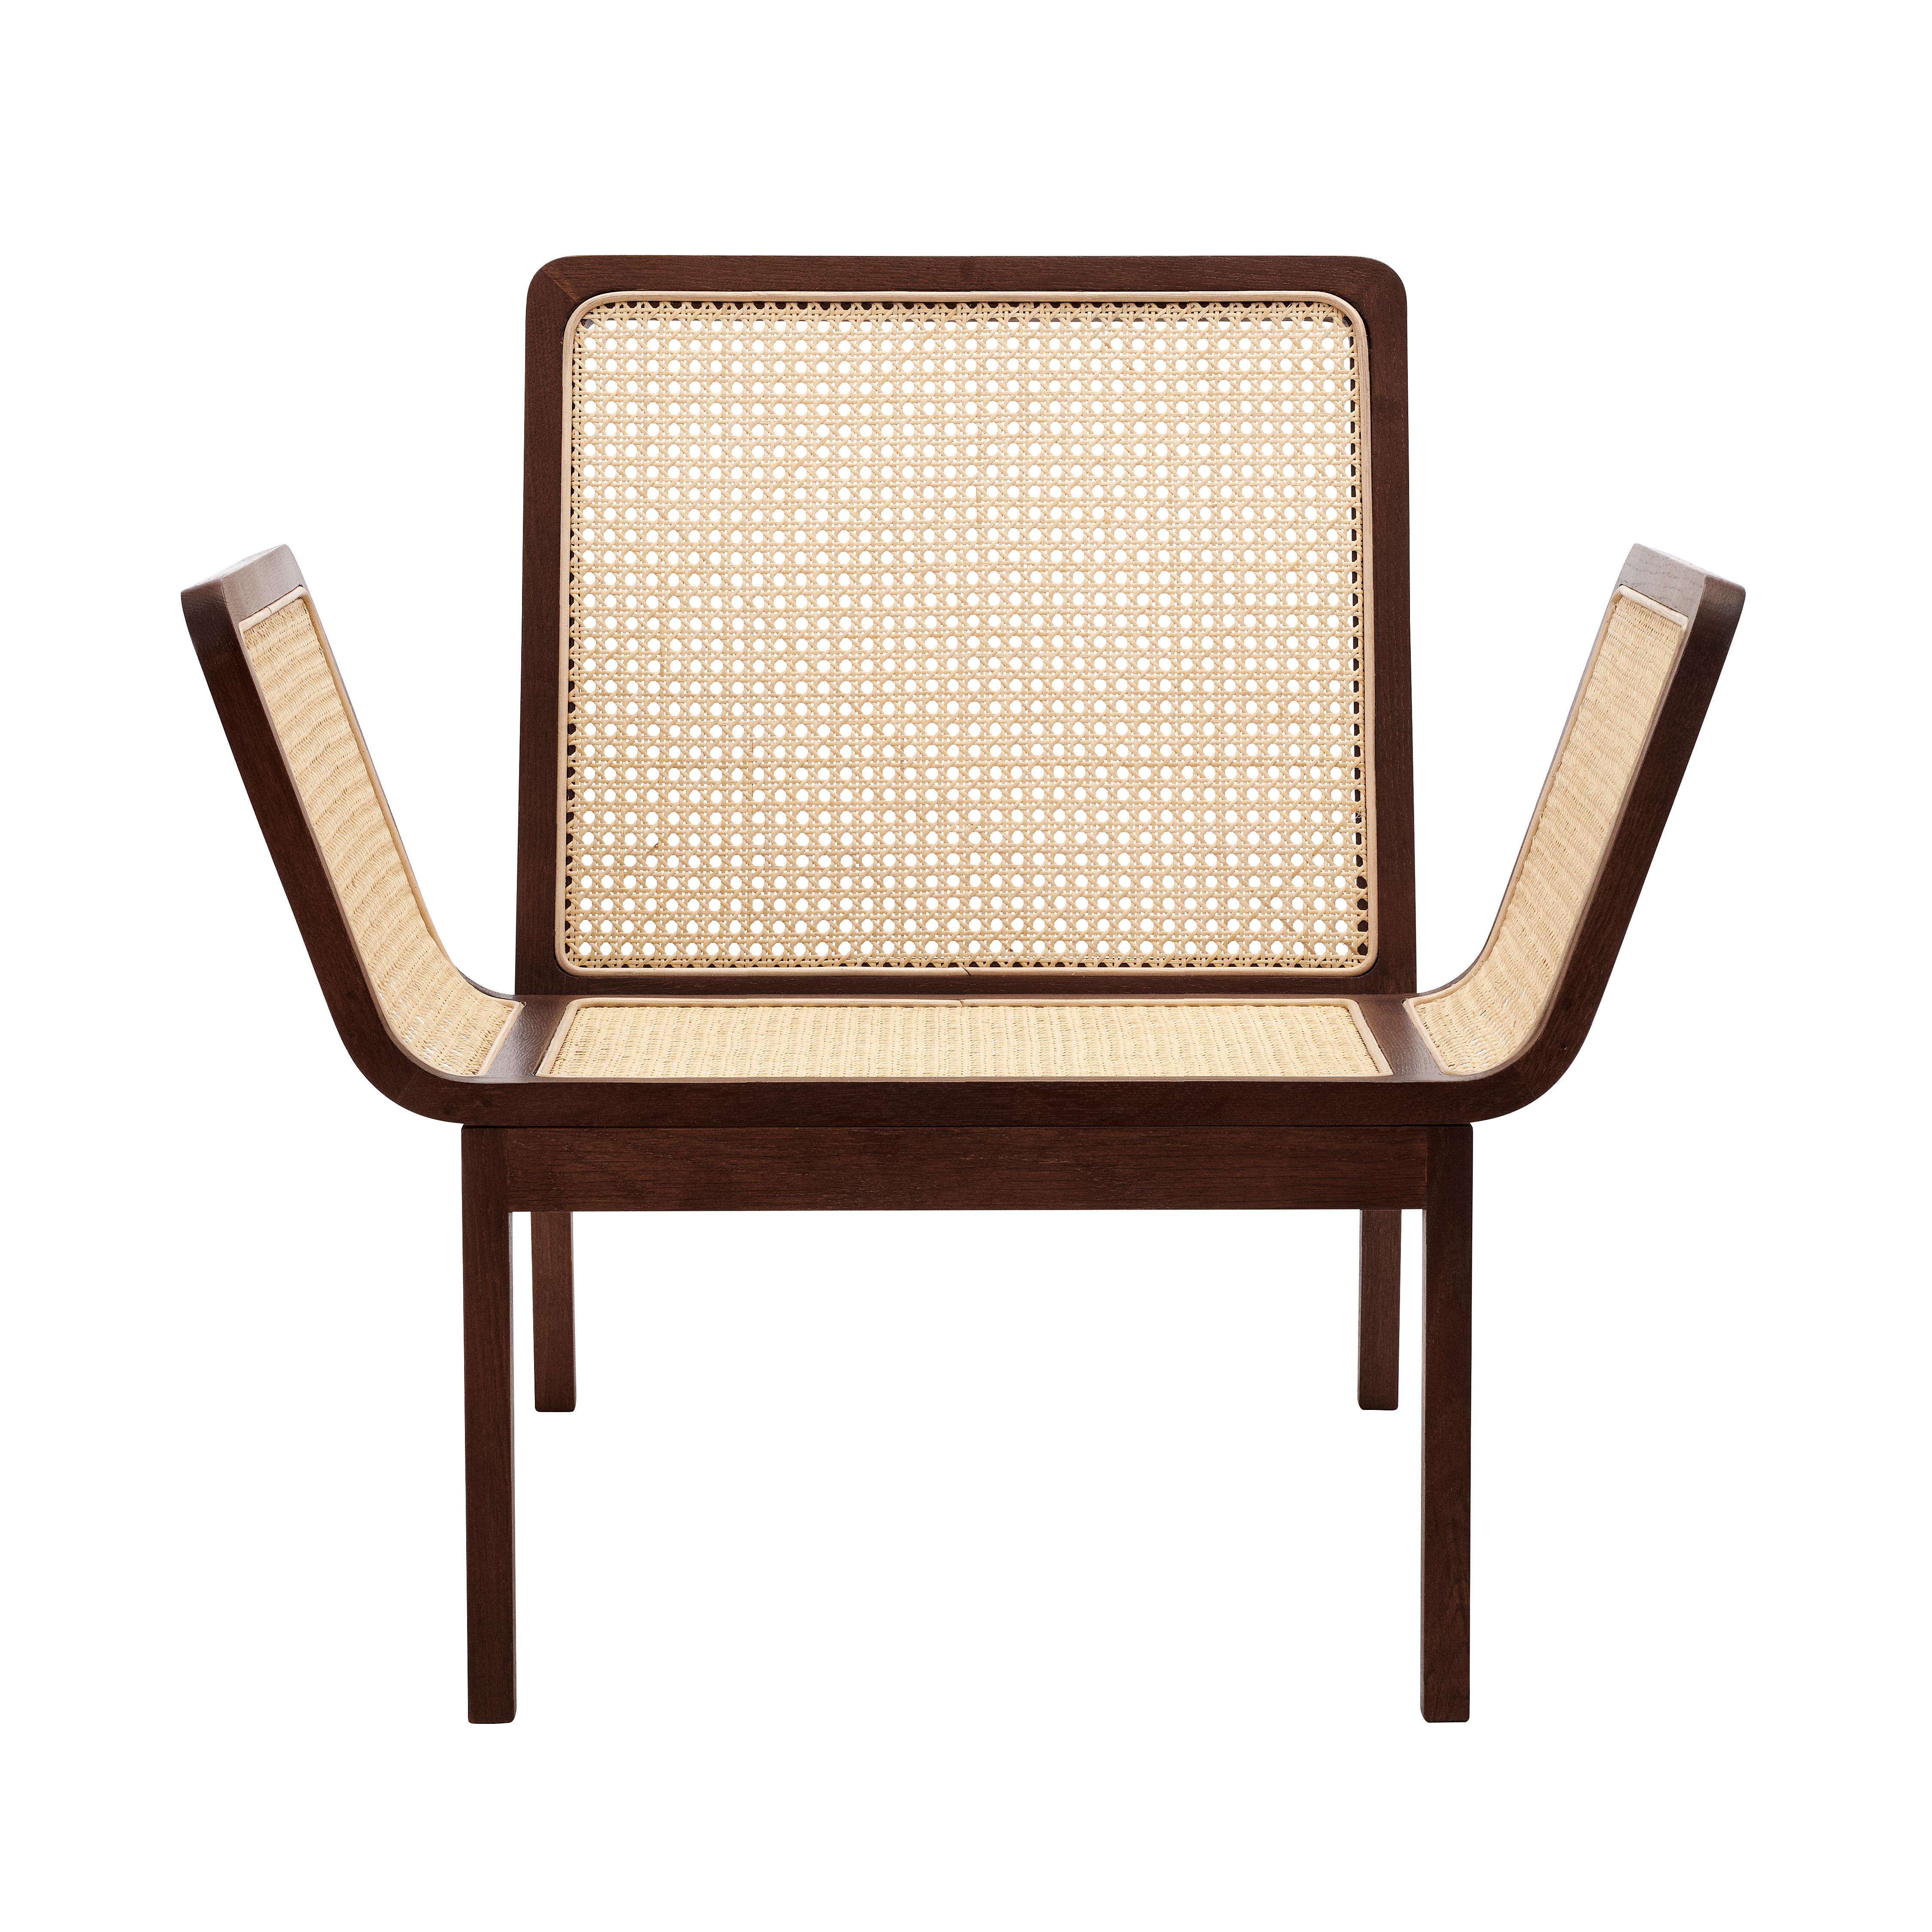 Le Roi Chair
by Kristian Sofus Hansen & Tommy Hyldahl

Lounge chair made of solid oak. Natural or Smoked finish.
Cushion at additional cost: linen or leather.

Le Roi Lounge chair is made from solid oak with inlaid French rattan. The collection is a